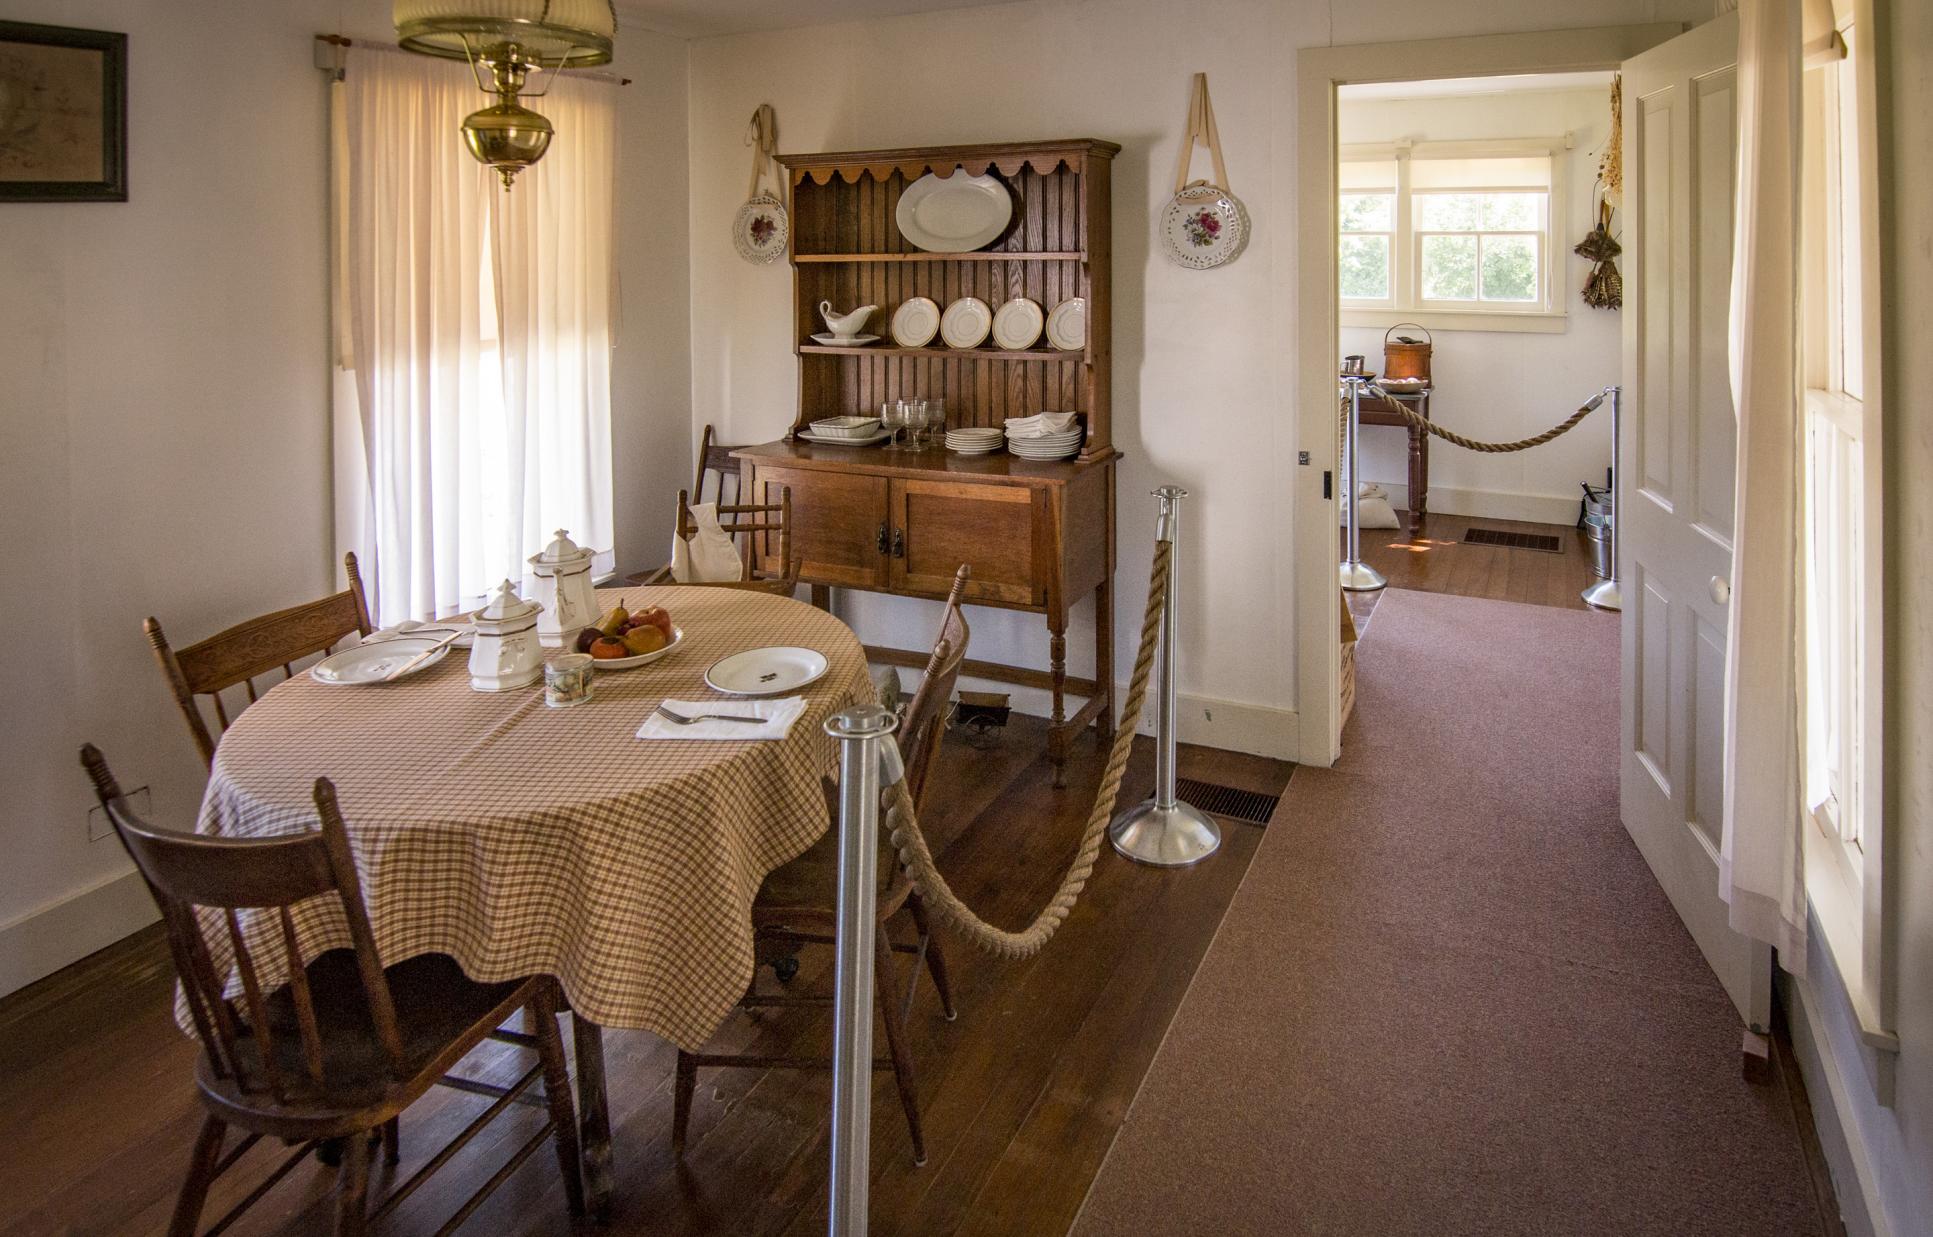 Dining room in main house